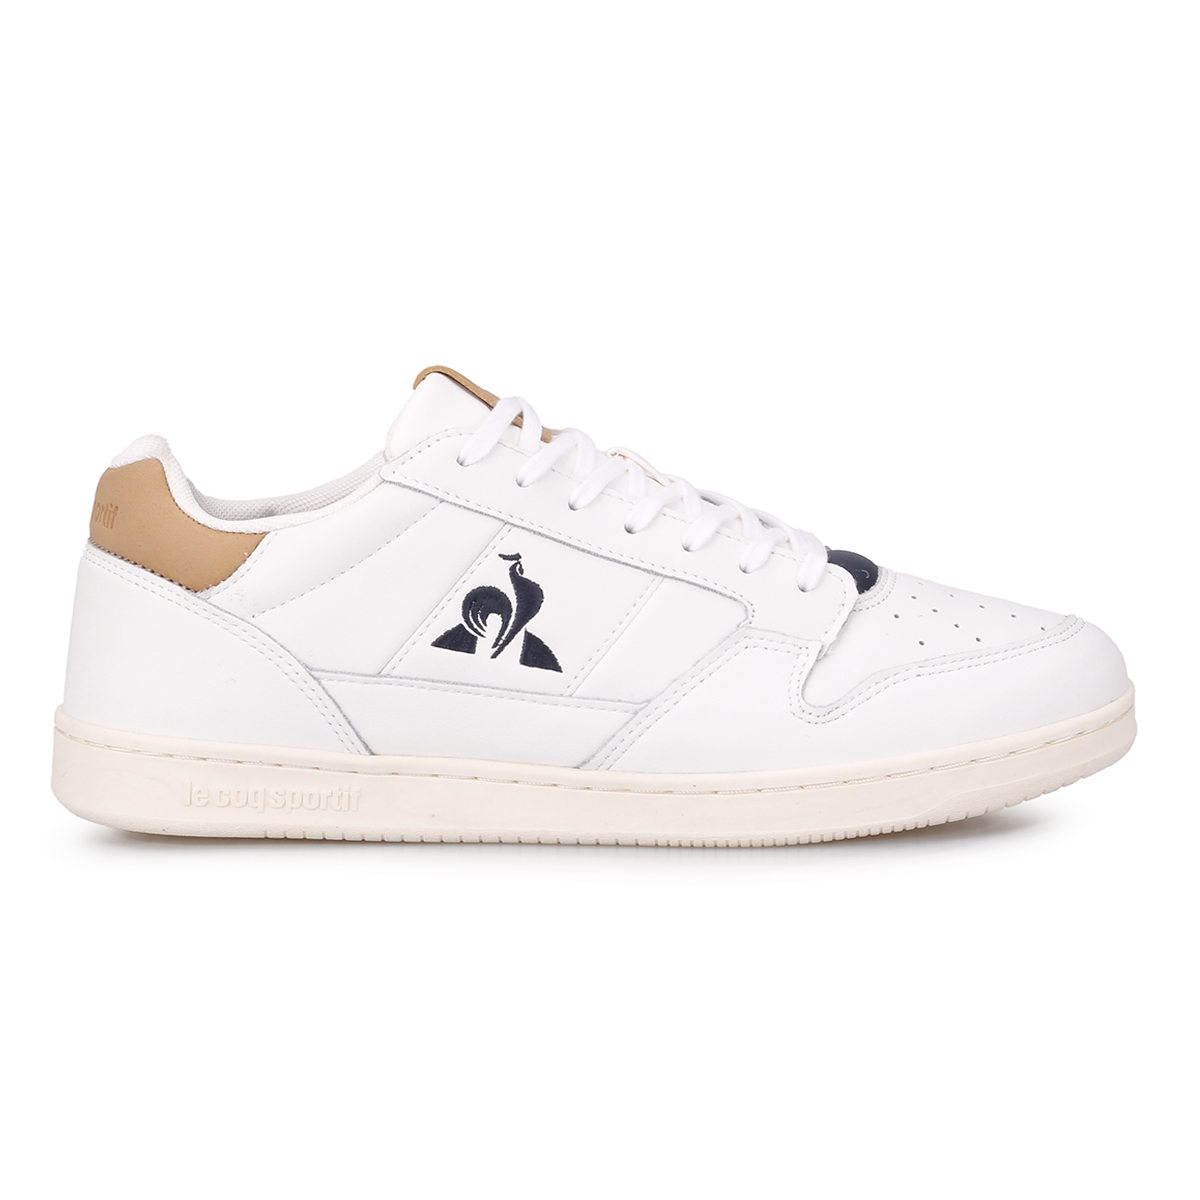 Zapatillas Le Coq Sportif Breackpoint Bbr Premium,  image number null